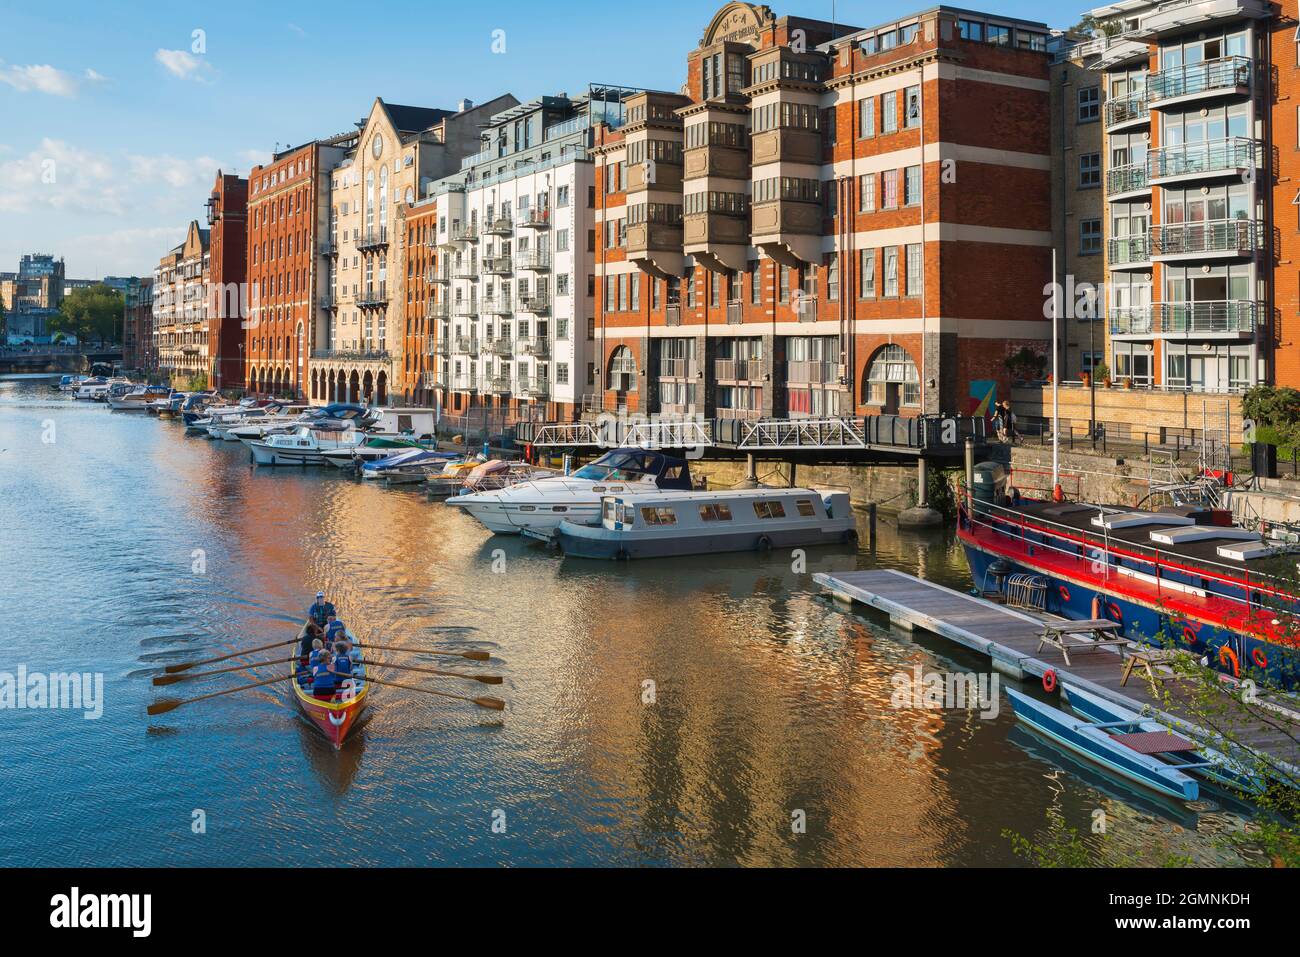 Bristol Floating Harbour, view of modernised properties lining Redcliffe Quay on the west side of the famous Floating Harbour in Bristol, England, UK Stock Photo